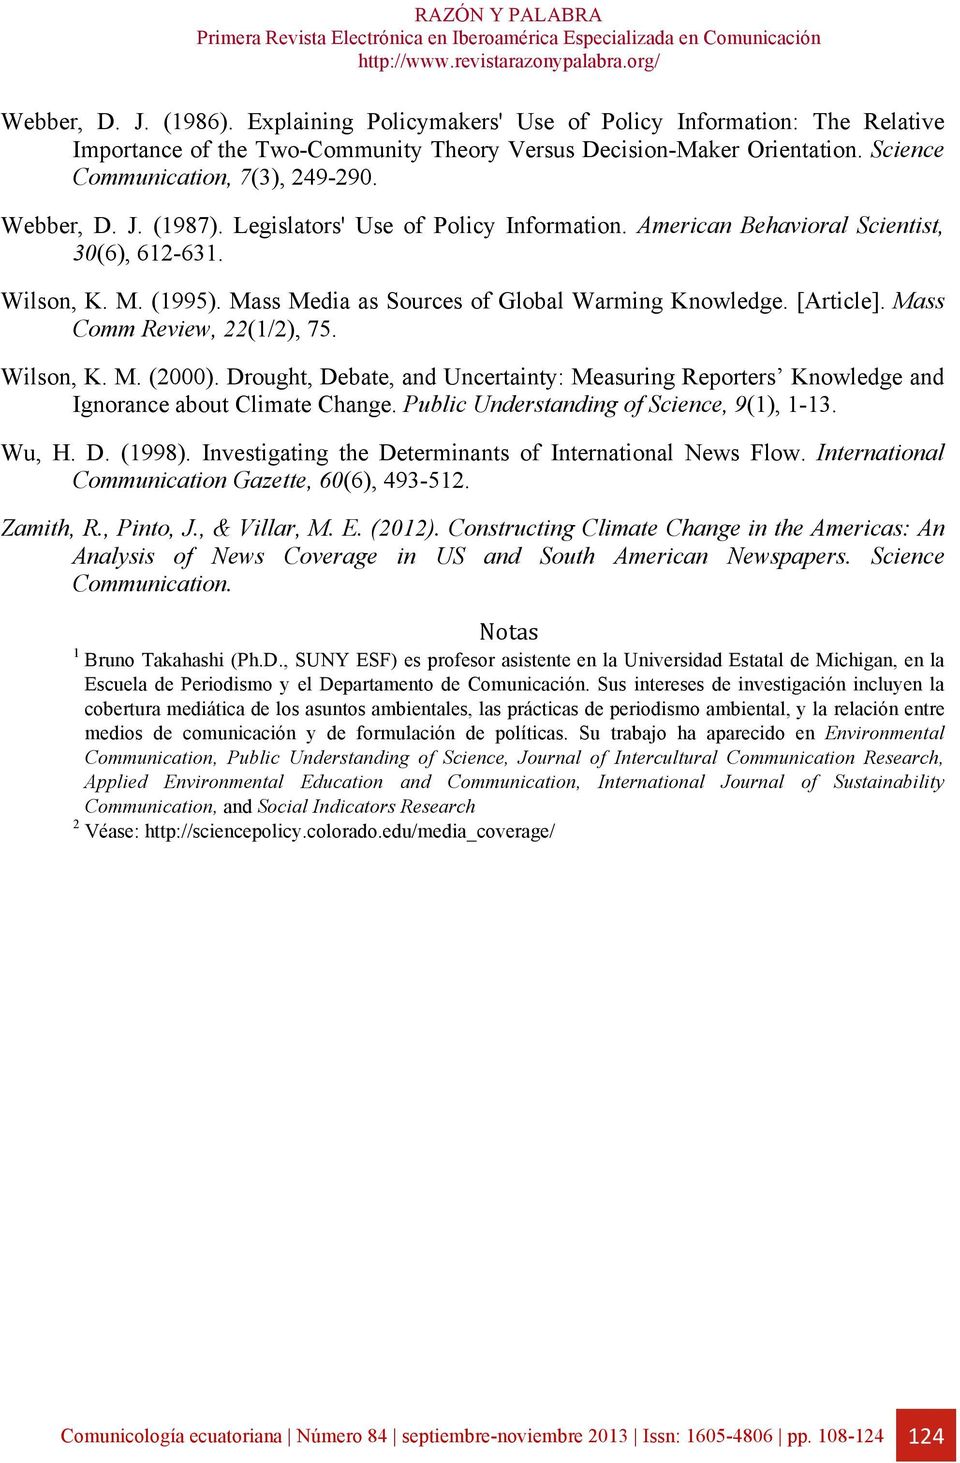 Mass Comm Review, 22(1/2), 75. Wilson, K. M. (2000). Drought, Debate, and Uncertainty: Measuring Reporters Knowledge and Ignorance about Climate Change. Public Understanding of Science, 9(1), 1-13.